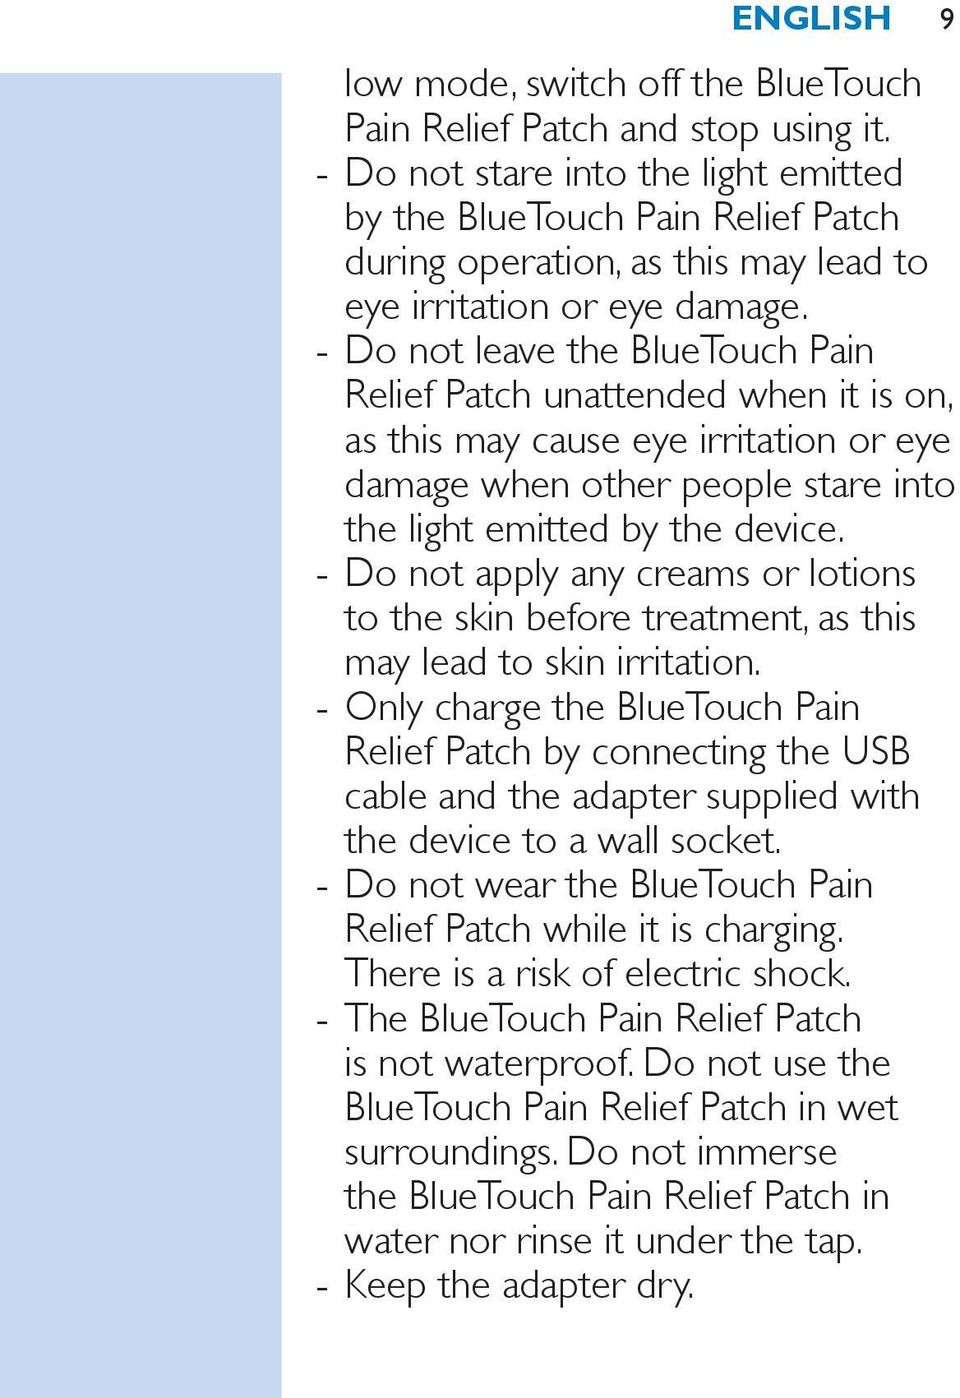 Do not leave the BlueTouch Pain Relief Patch unattended when it is on, as this may cause eye irritation or eye damage when other people stare into the light emitted by the device.